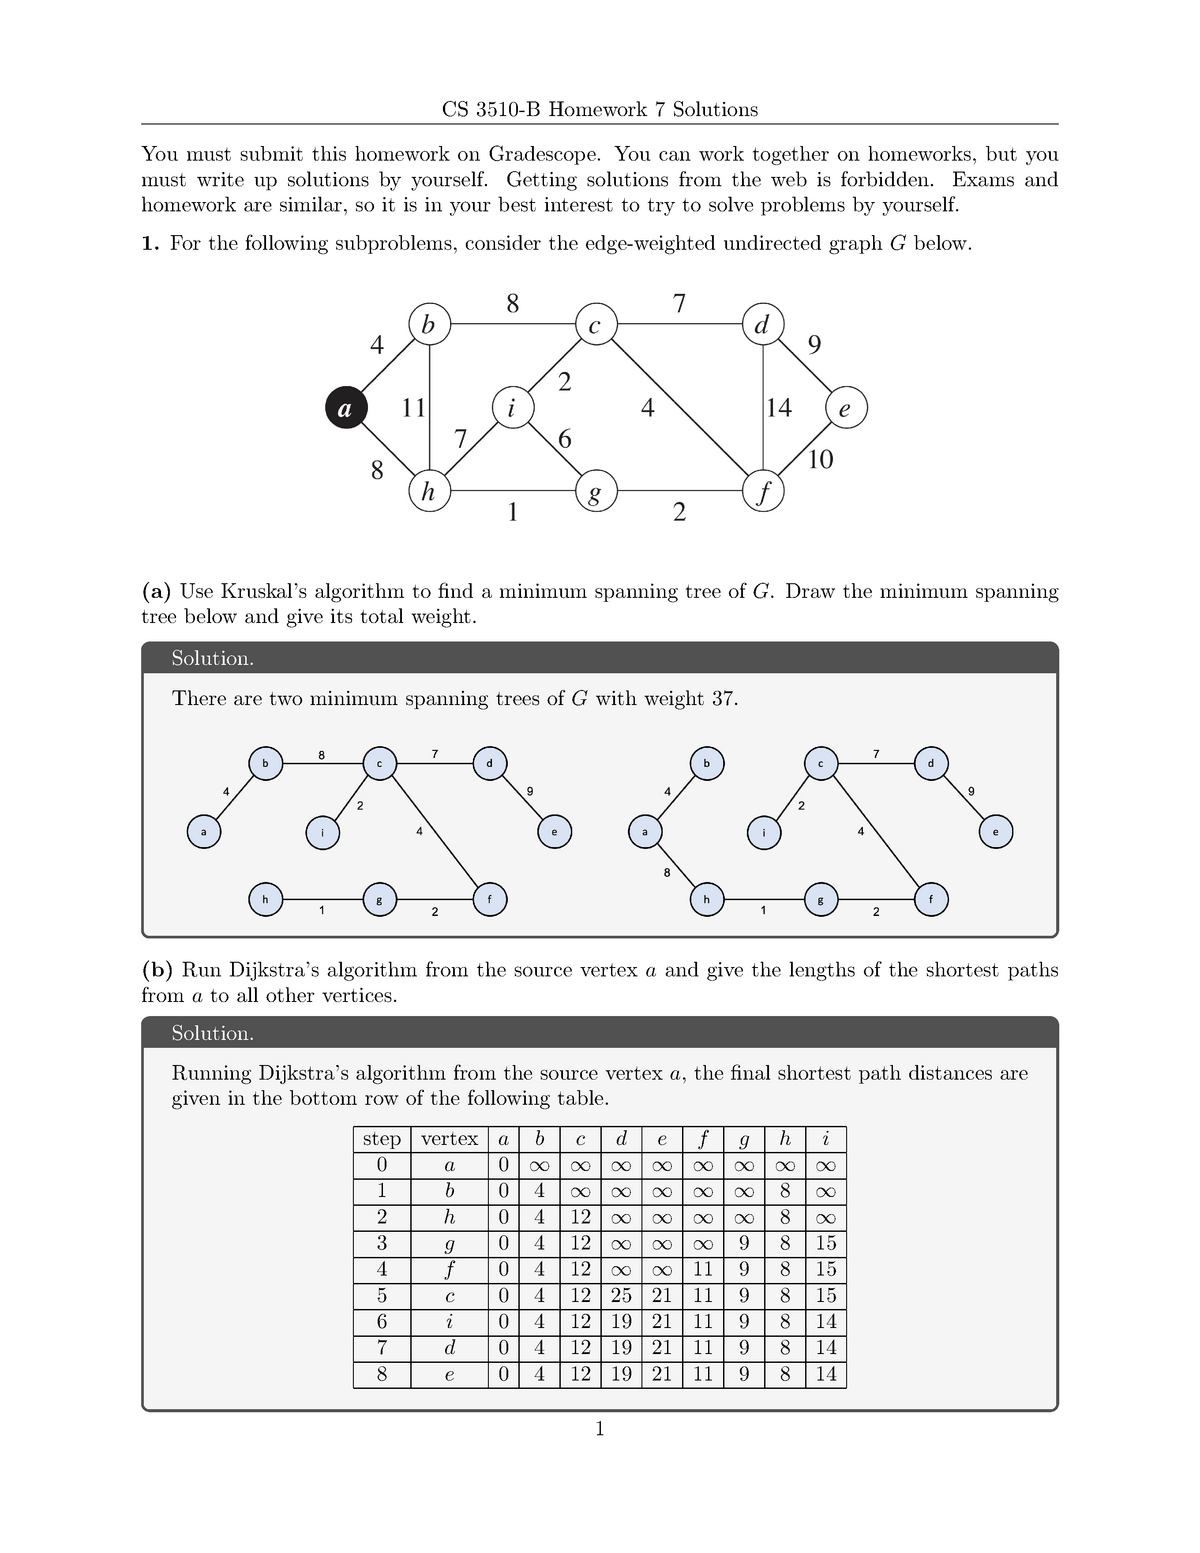 DS-501-Introduction-to-data-science/Case study  3/CaseStudy3_problem4_11_16.ipynb at master ·  DekunGeng/DS-501-Introduction-to-data-science · GitHub